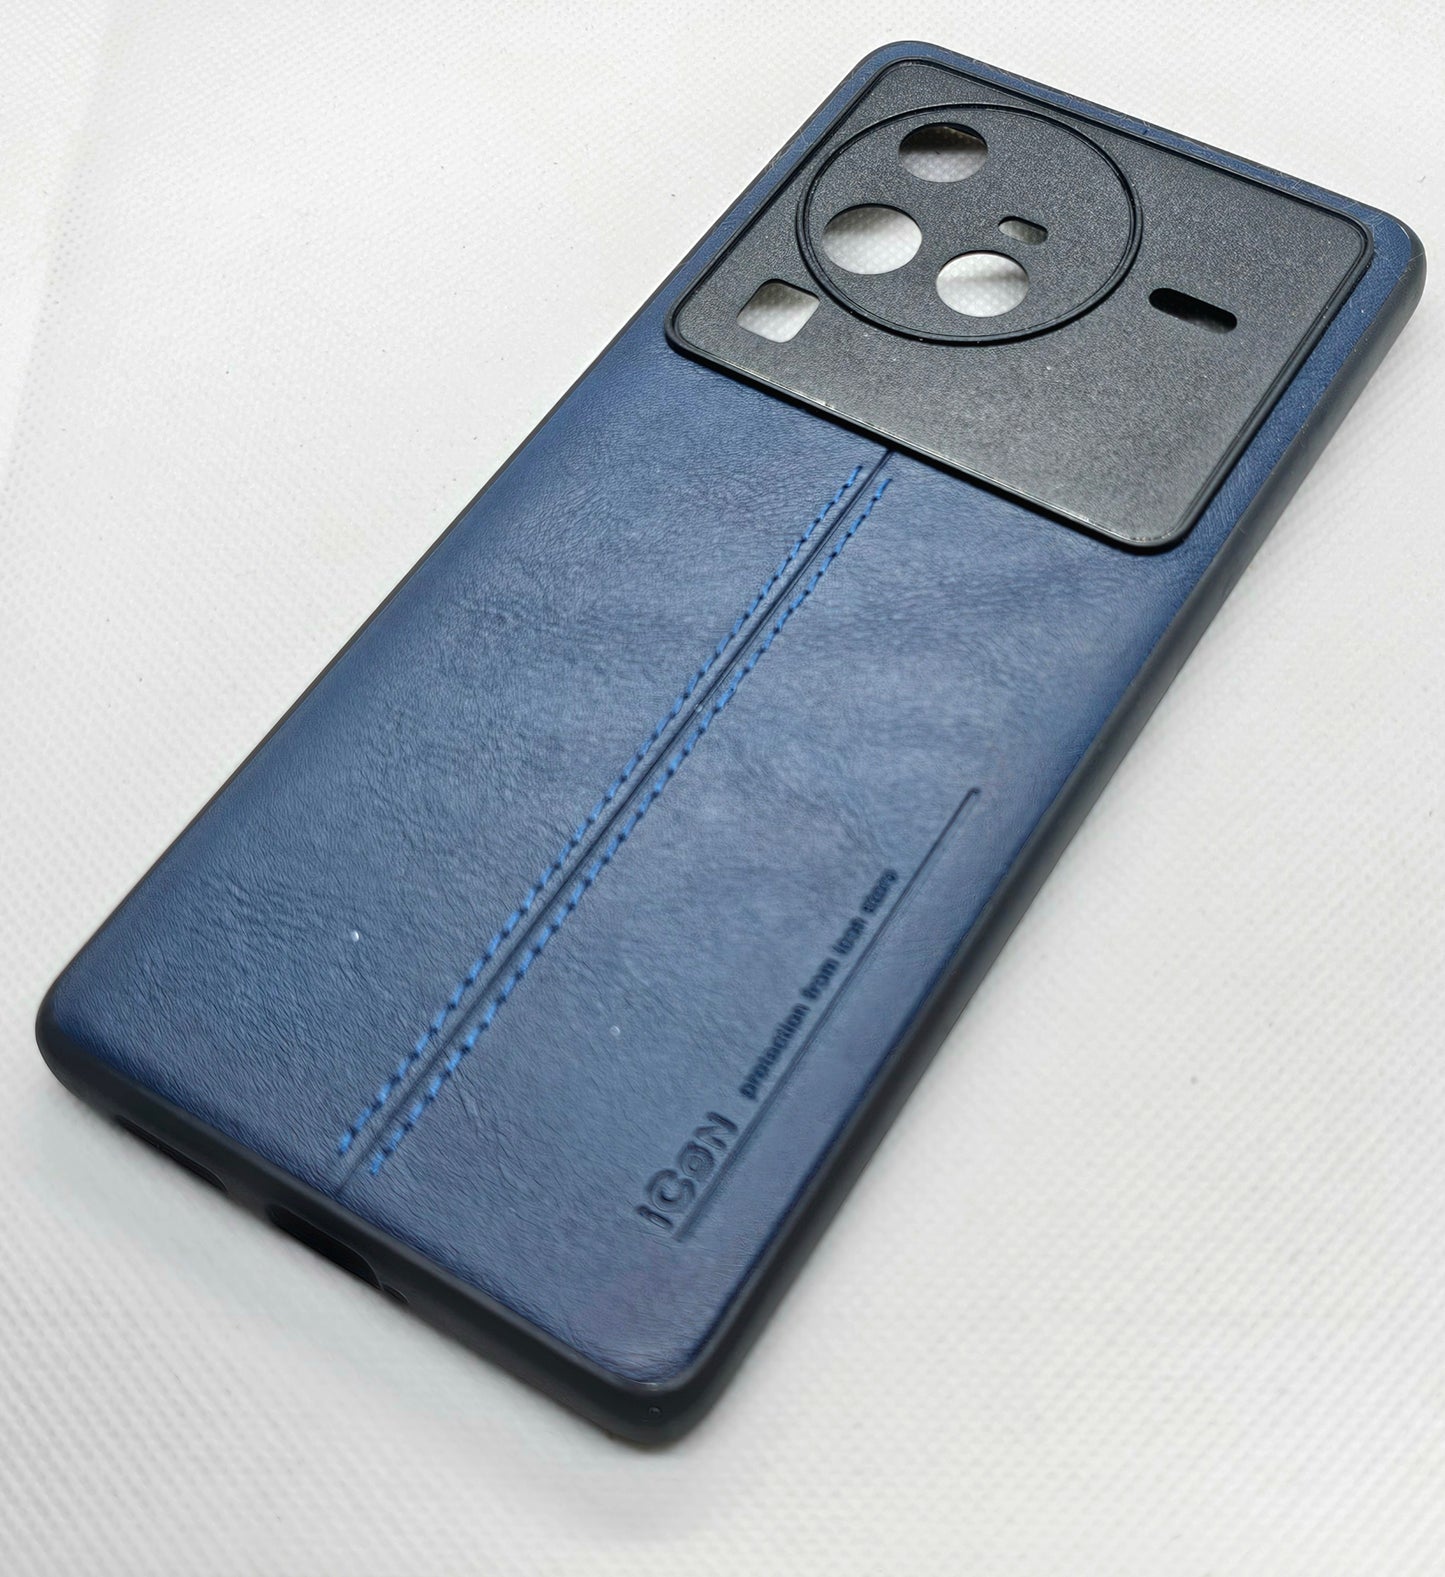 Luxurious Leather Vivo X80 Pro Mobile Back Cover